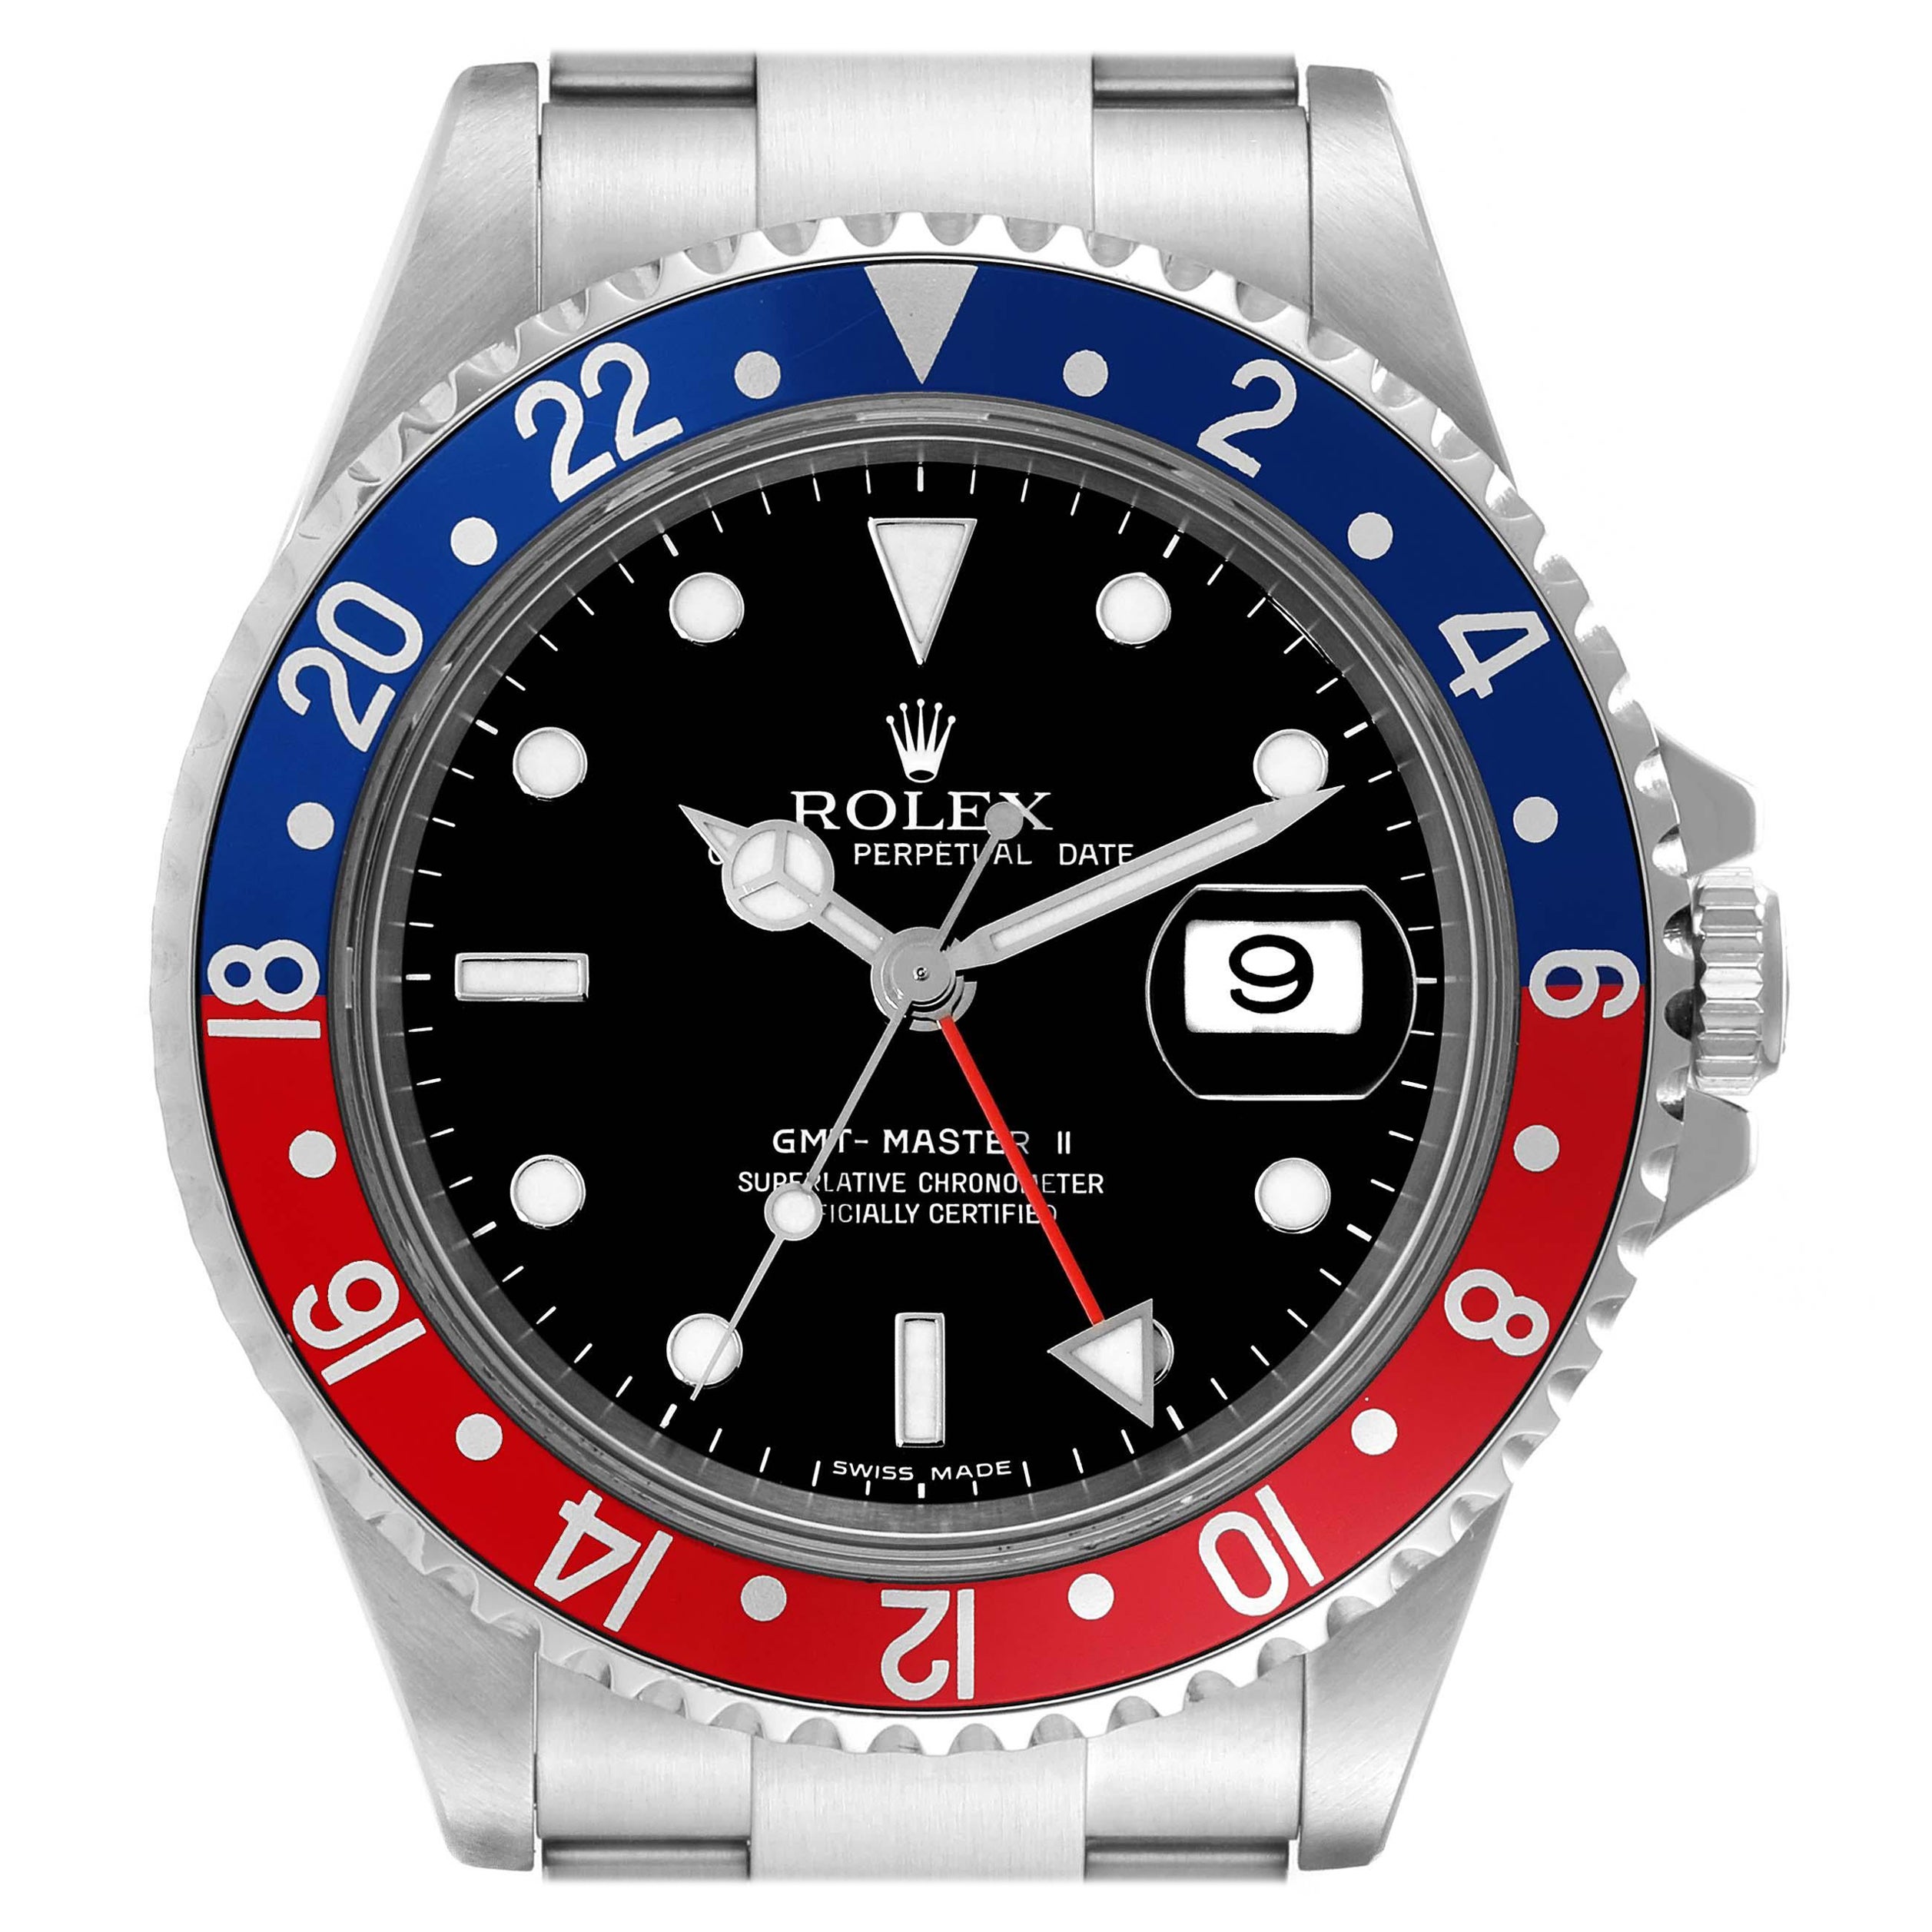 Rolex GMT Master II Blue Red Pepsi Error Dial Steel Mens Watch 16710 Box Papers